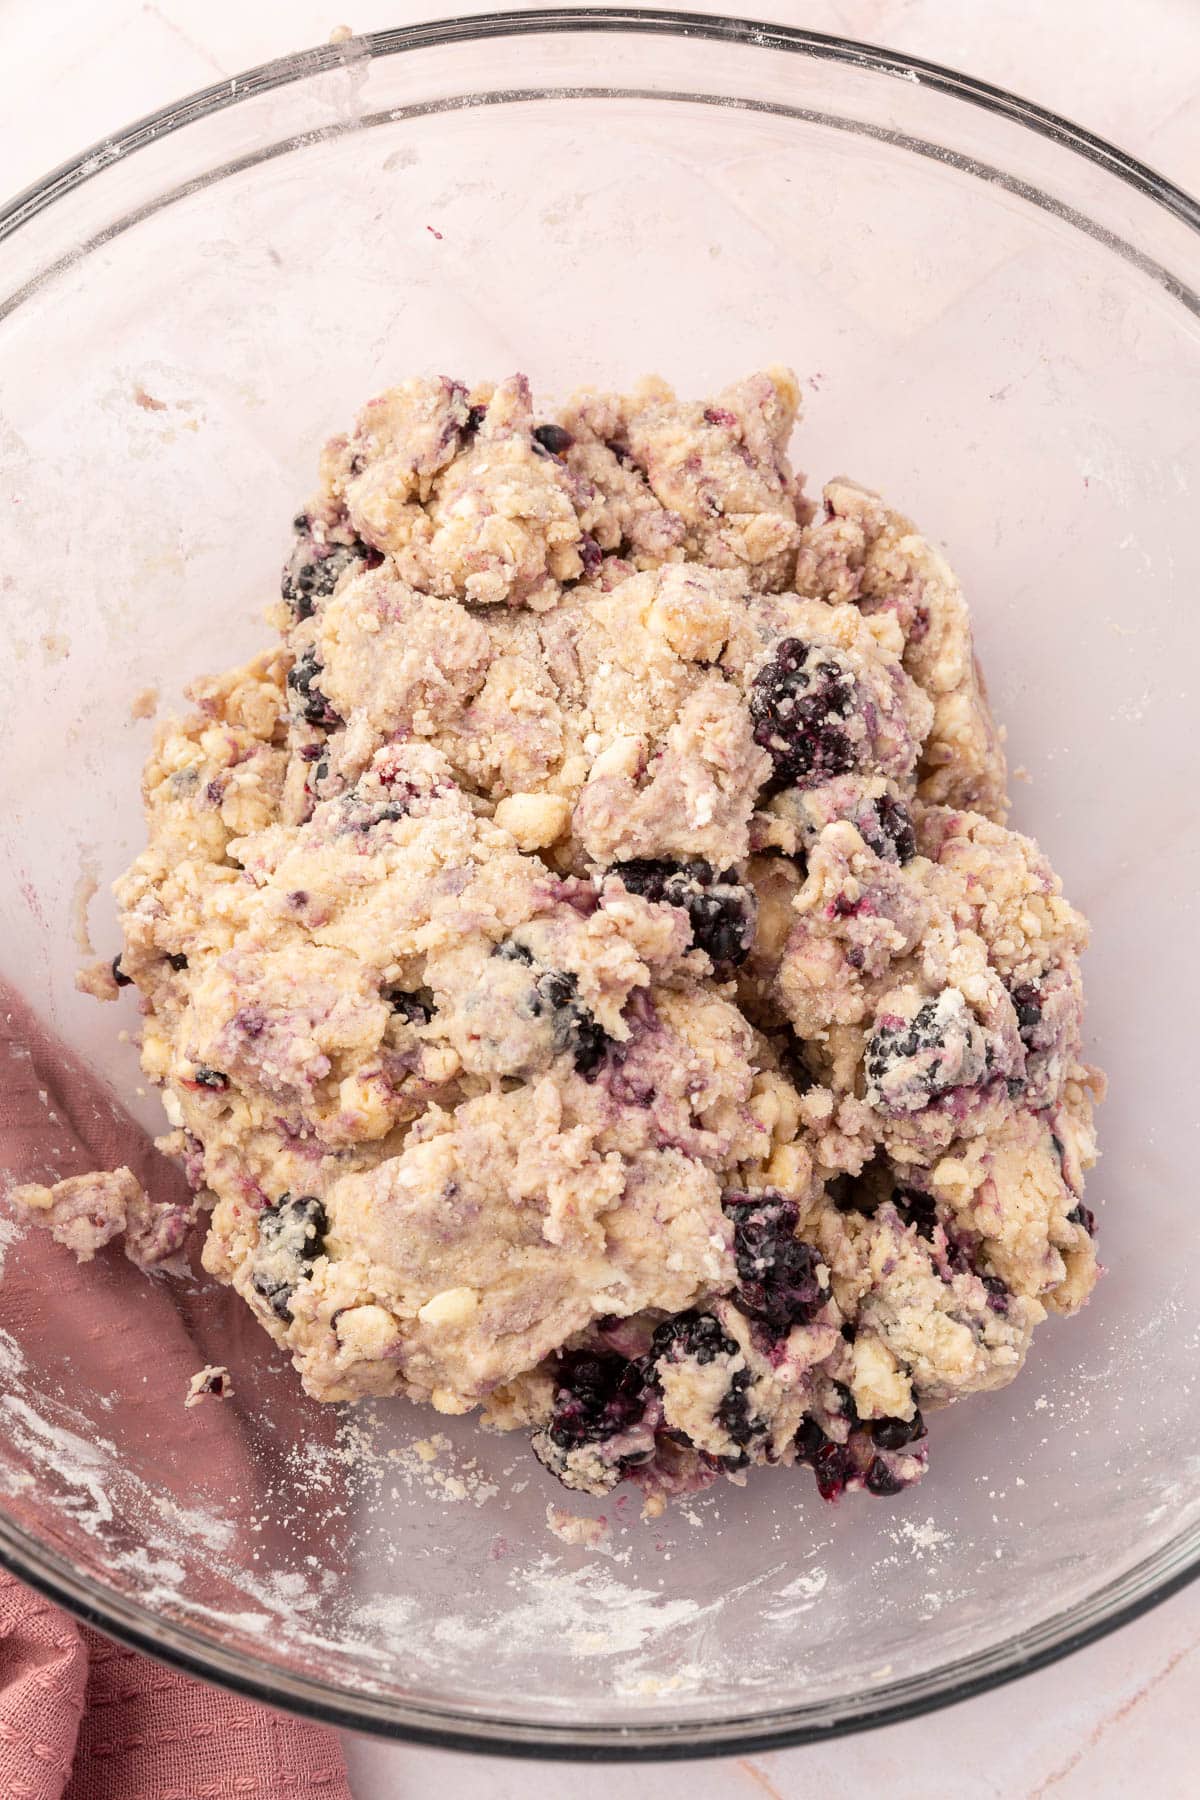 A glass mixing bowl filled with gluten-free blackberry scone dough.